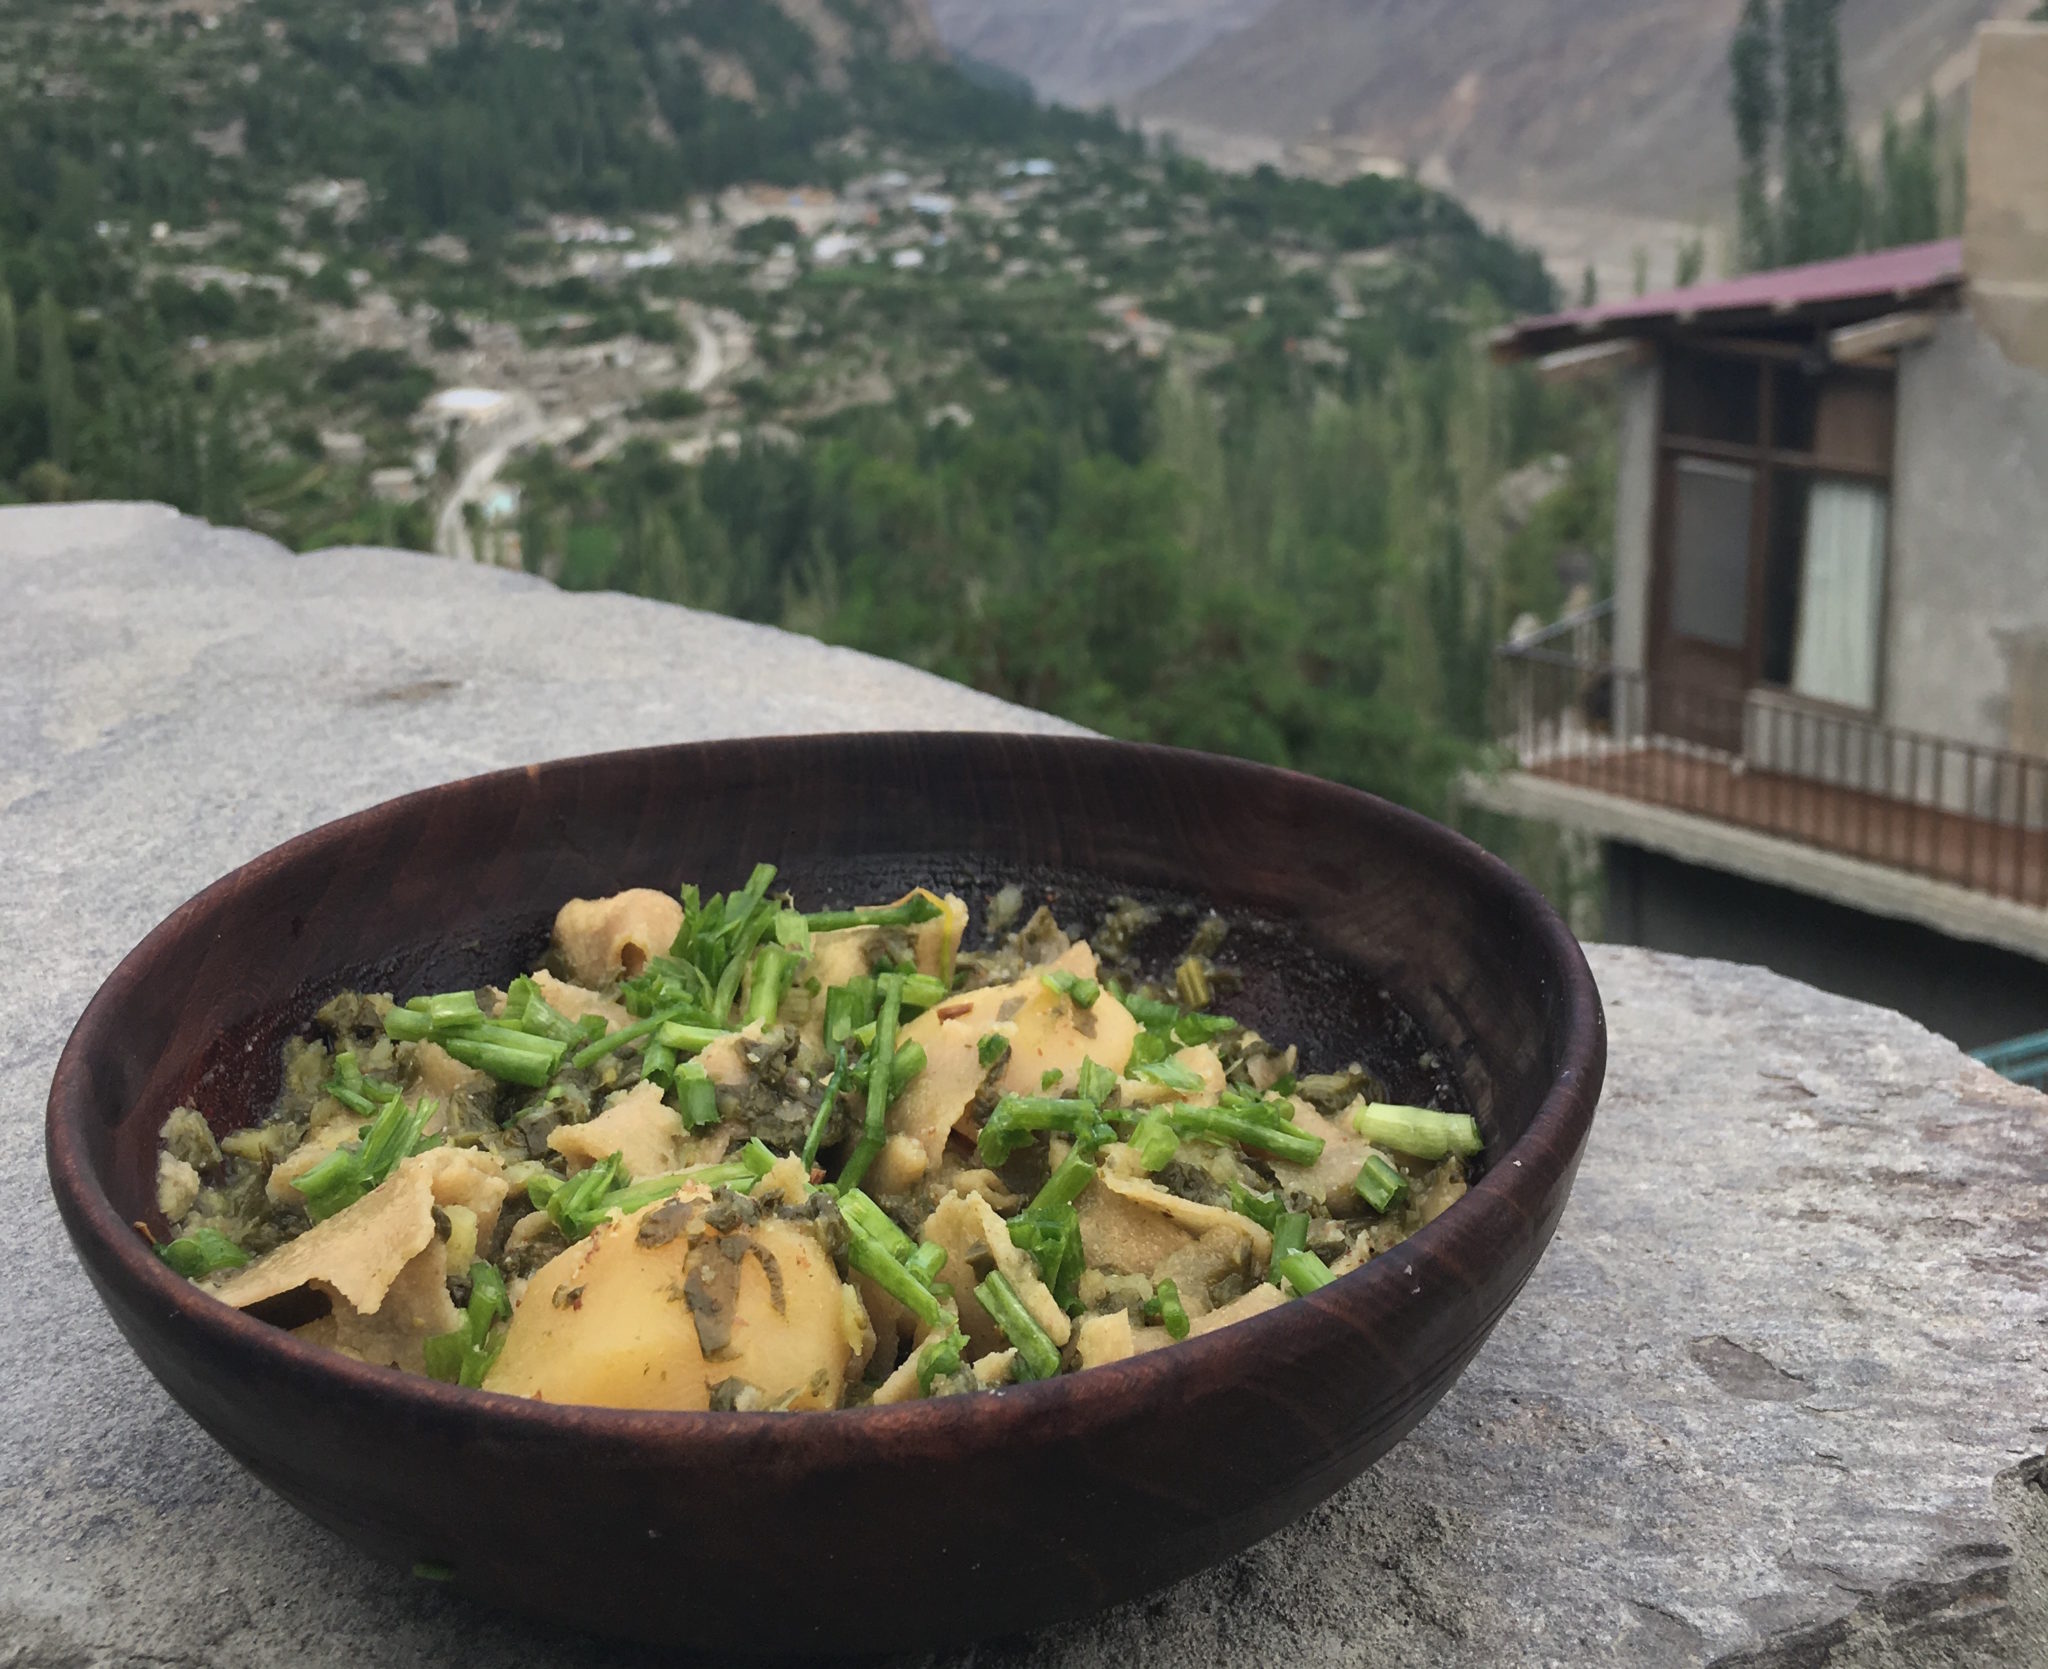 Chowing down in the Hunza Valley